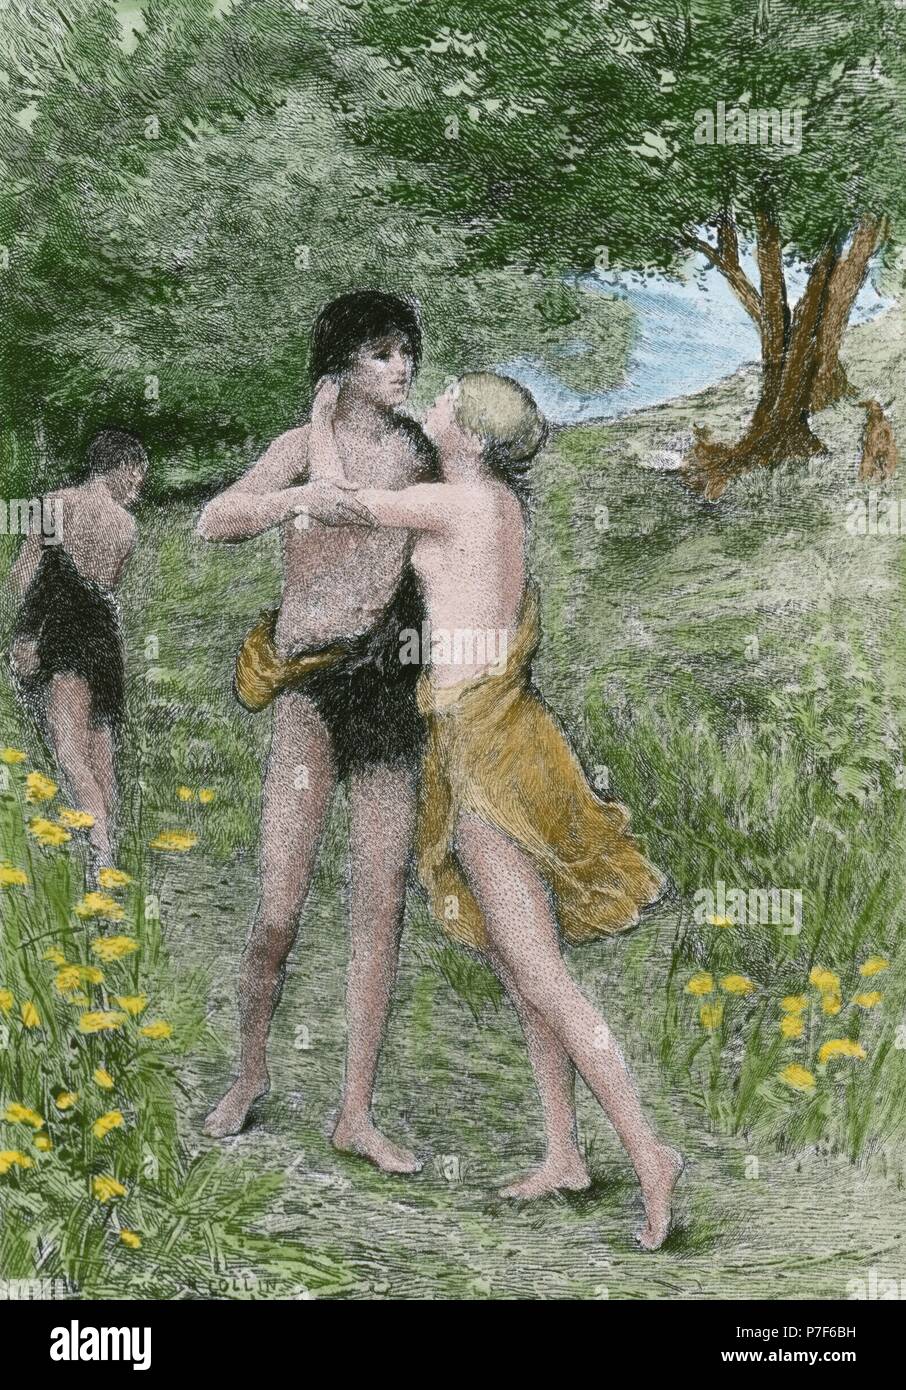 Daphnis and Chloe by Greek novelist Longus. 2nd century AD. Drawing by Raphael Collin (1850-1916) and  engraving by Eugene -Andre Champollion (1848-1901), 1890. Colored. Stock Photo